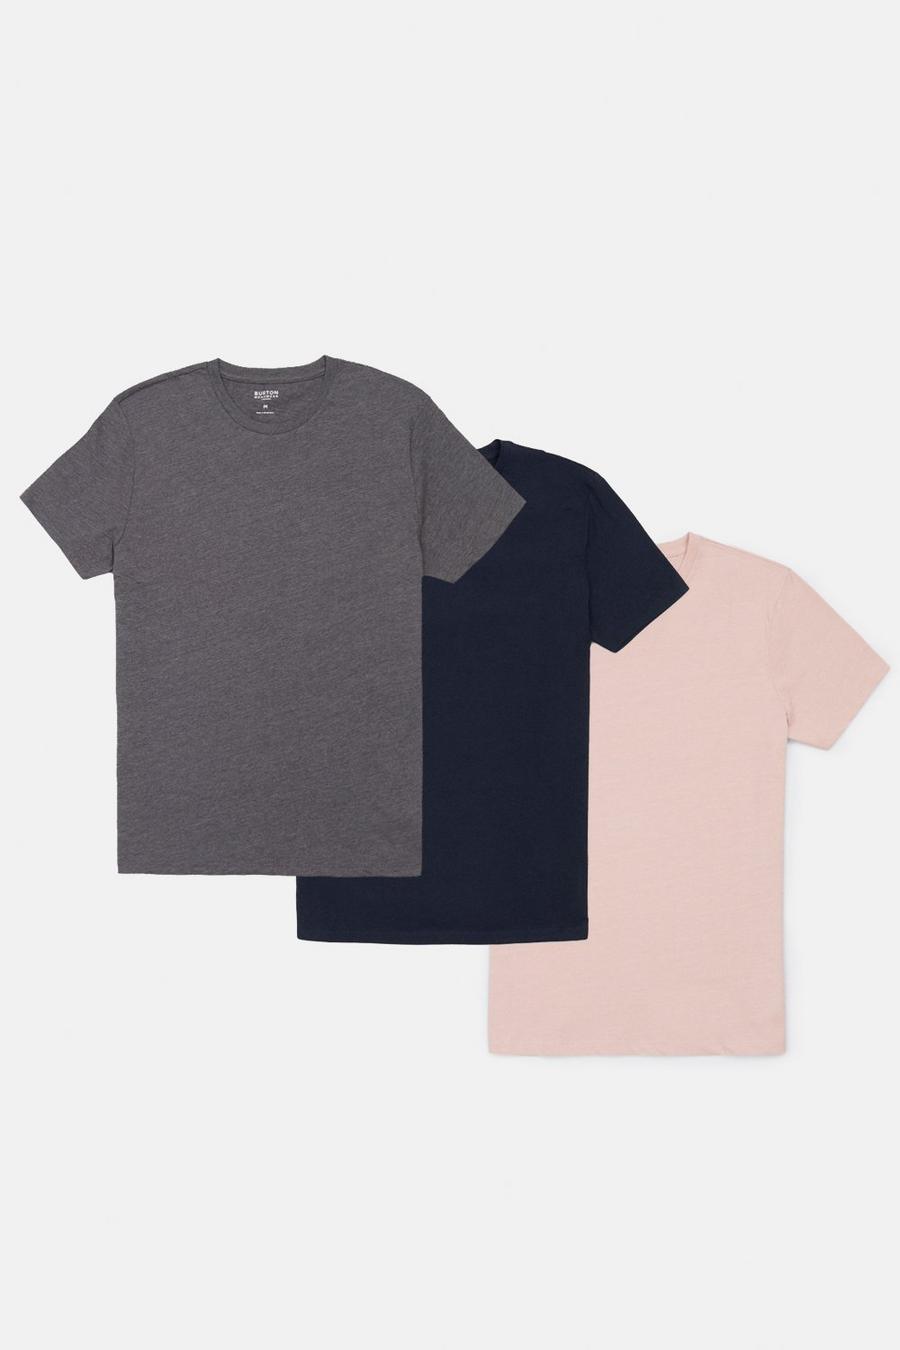 3 Pack Regular Fit Navy Charcoal And Coral Pink T-Shirt